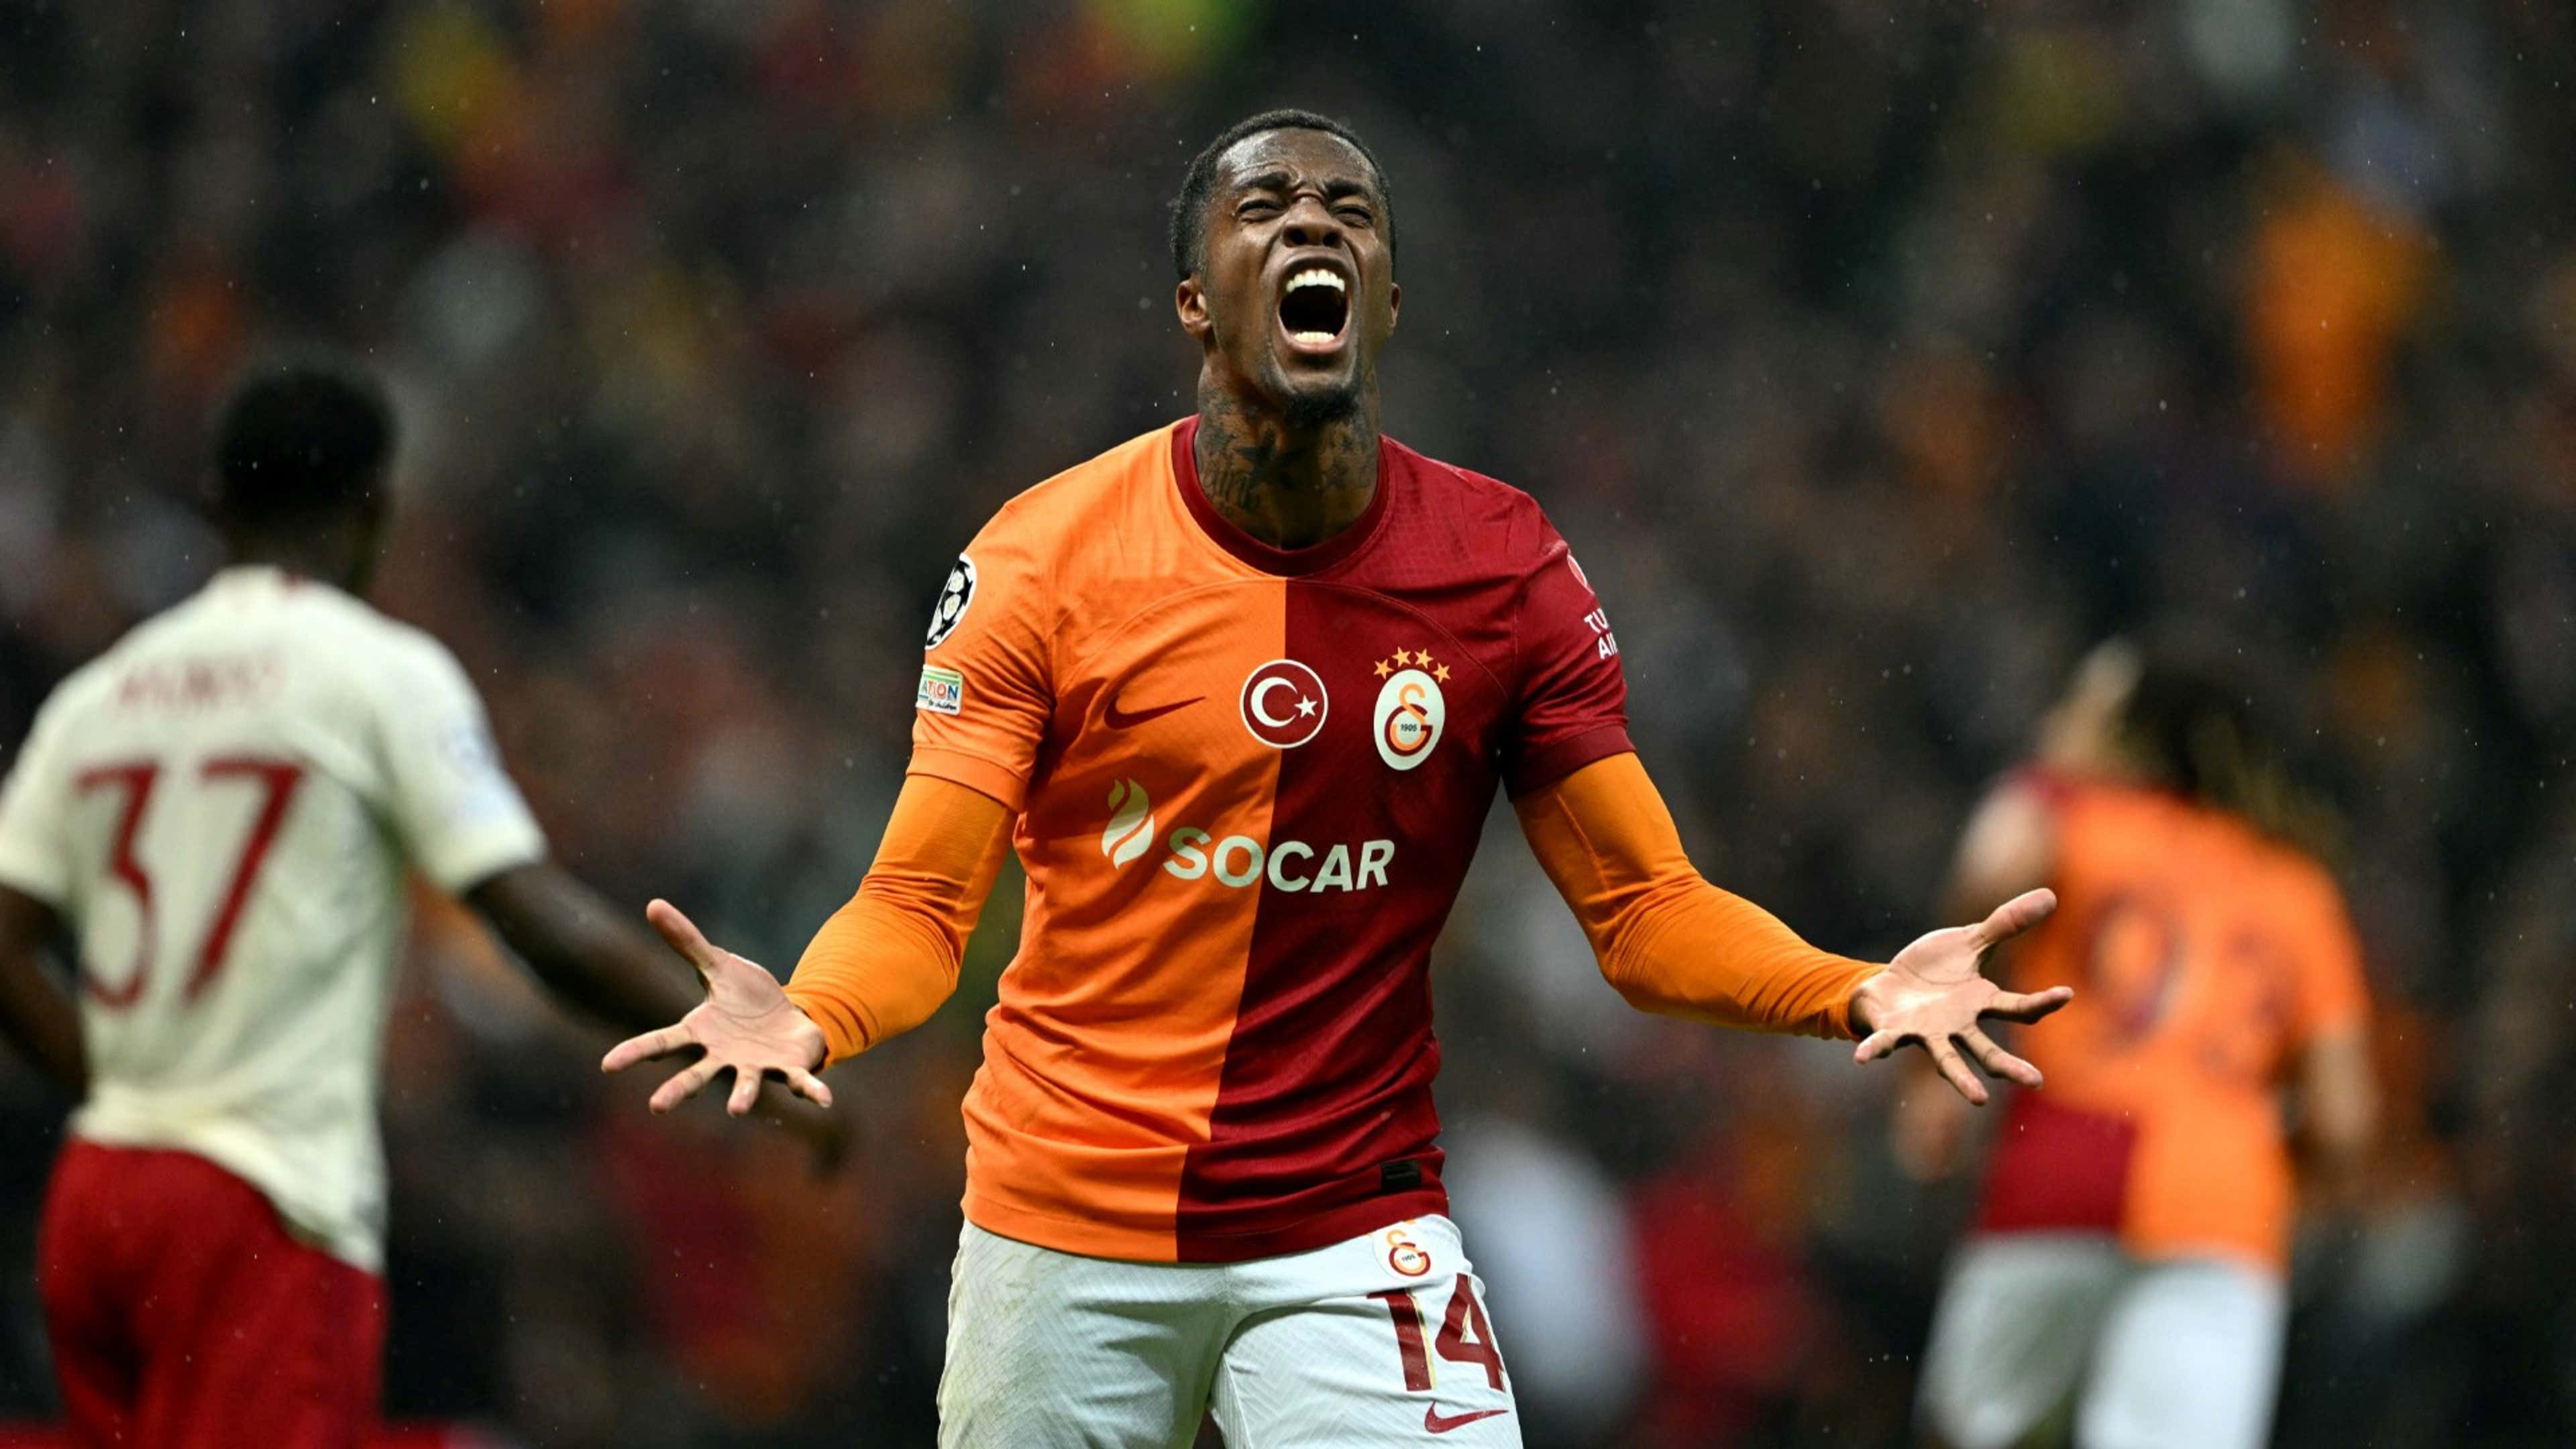 Galatasaray vs Istanbulspor: Live stream, TV channel, kick-off time & where  to watch